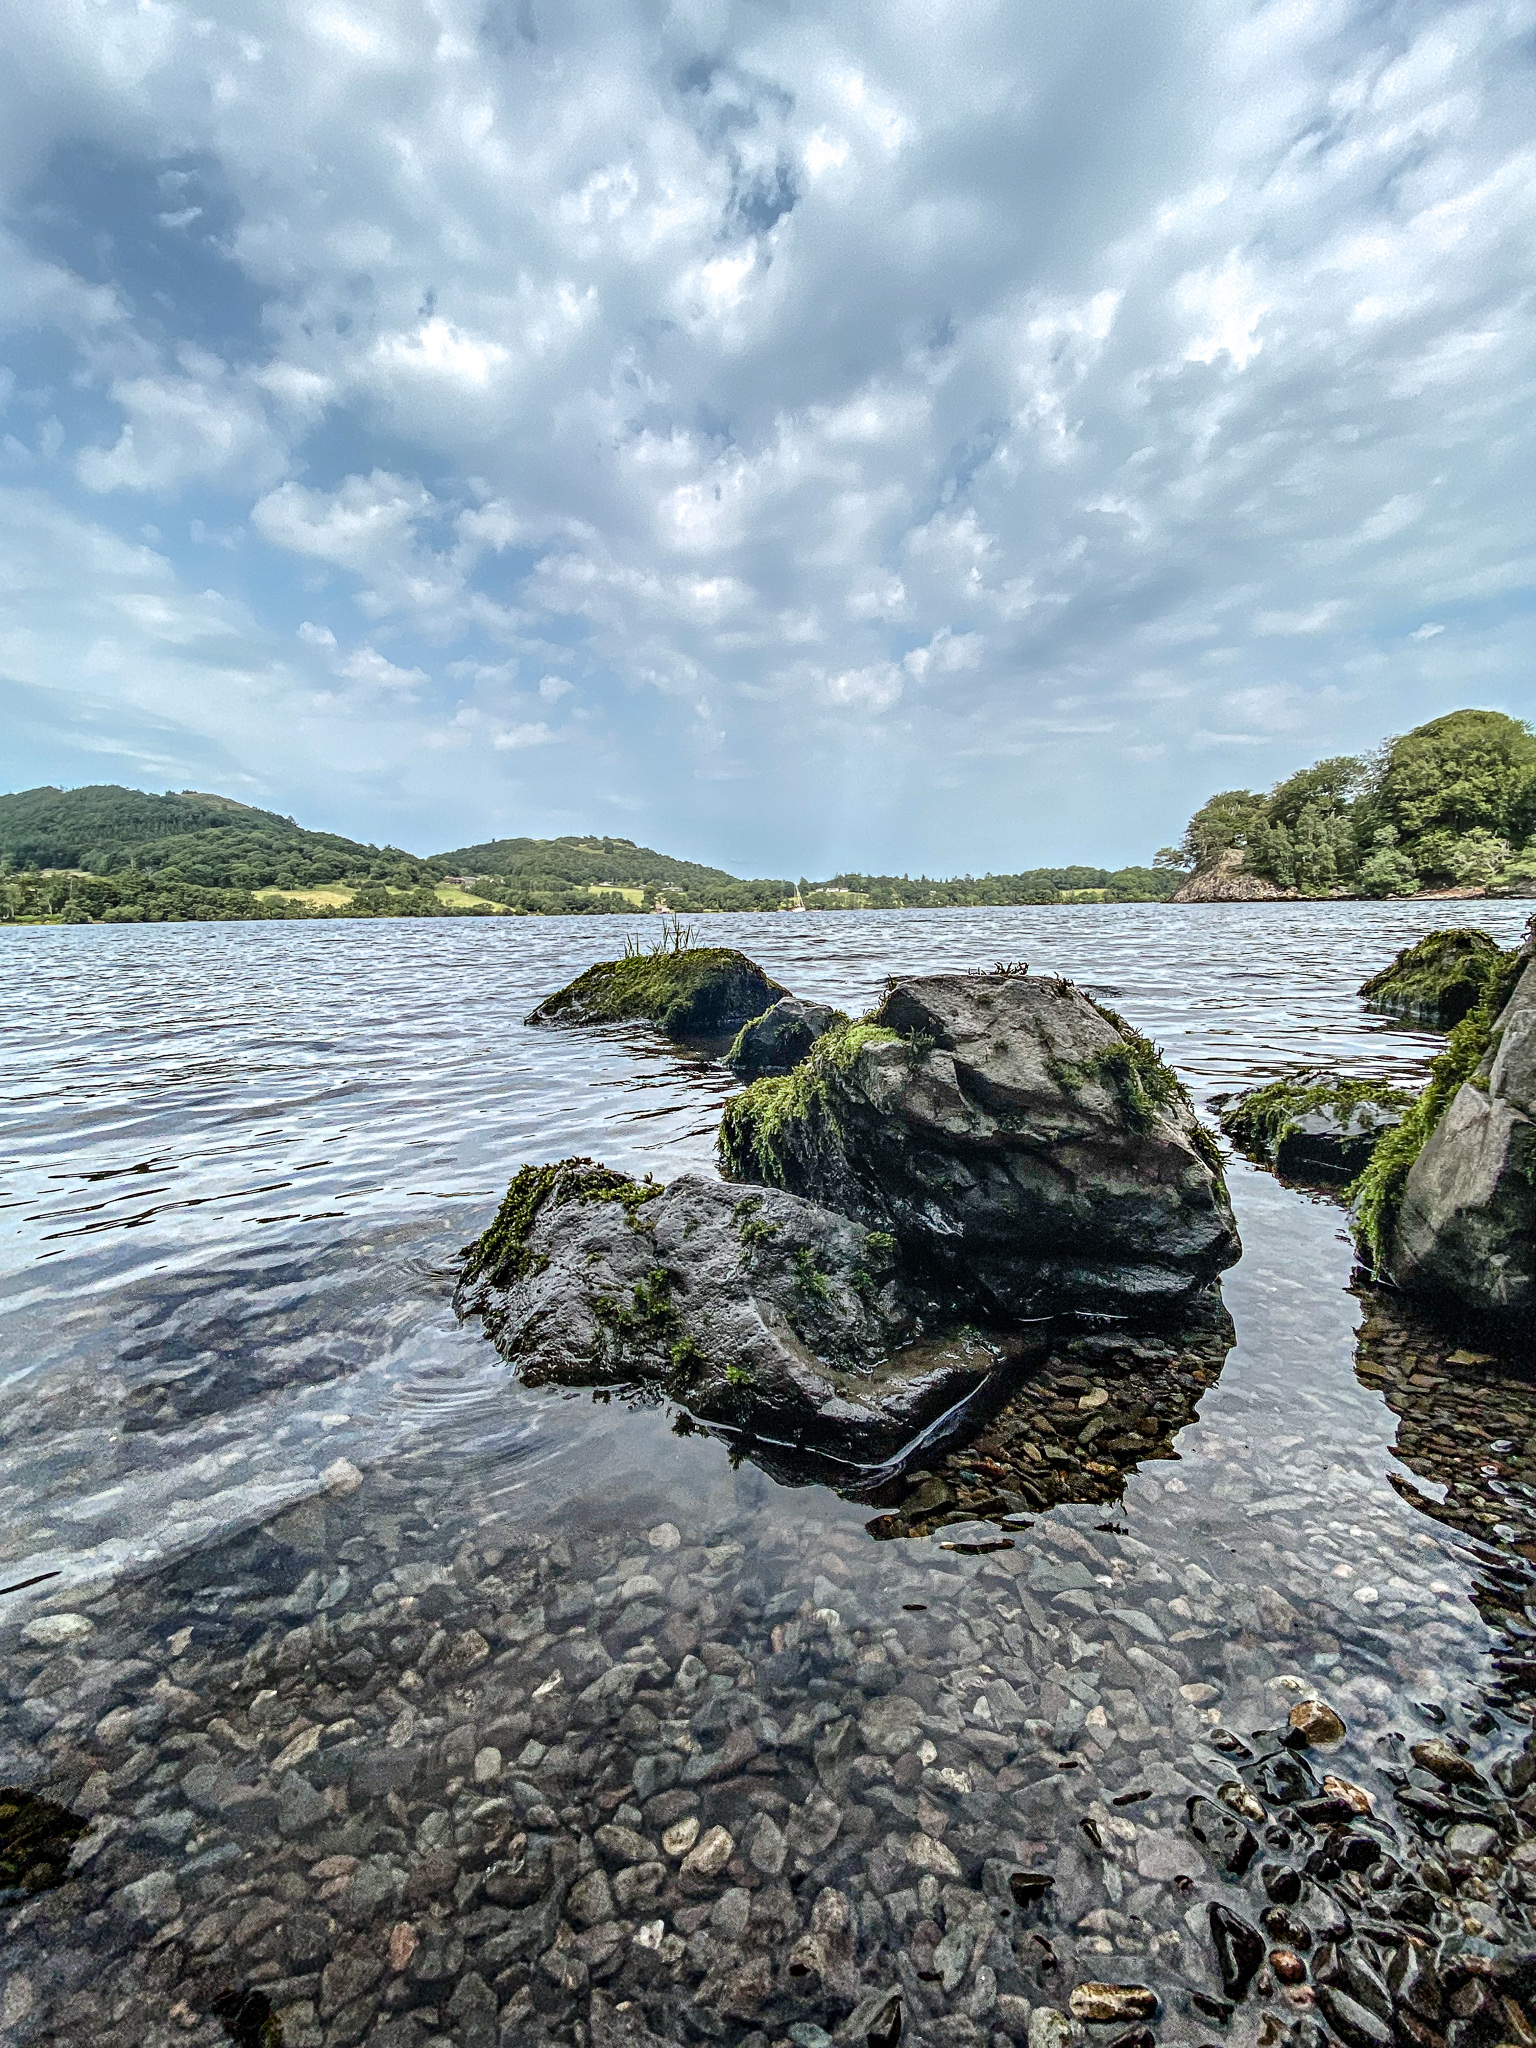 Ullswater in the lake district